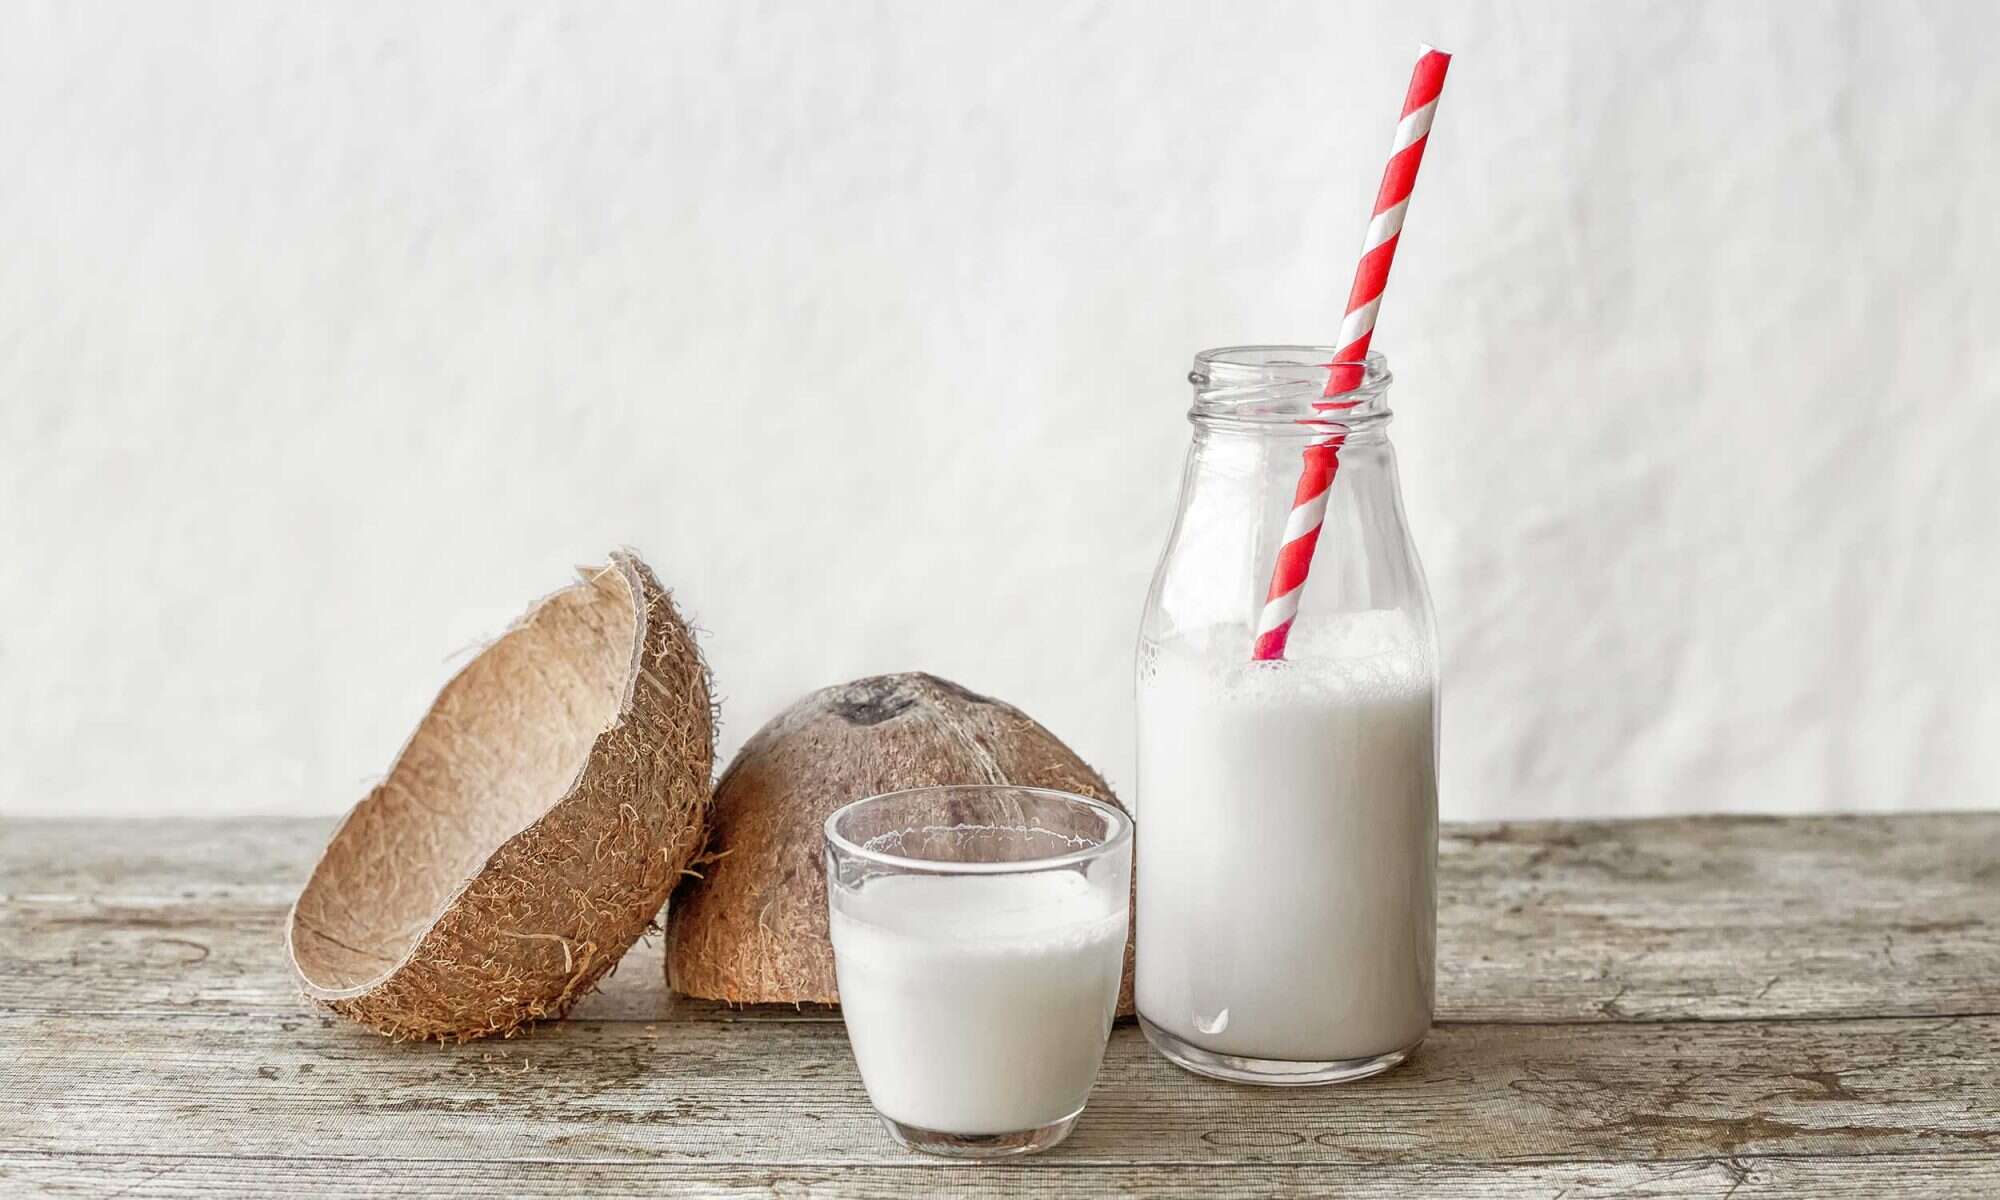 Coconut Milk vs. Coconut Water: What's the Difference?